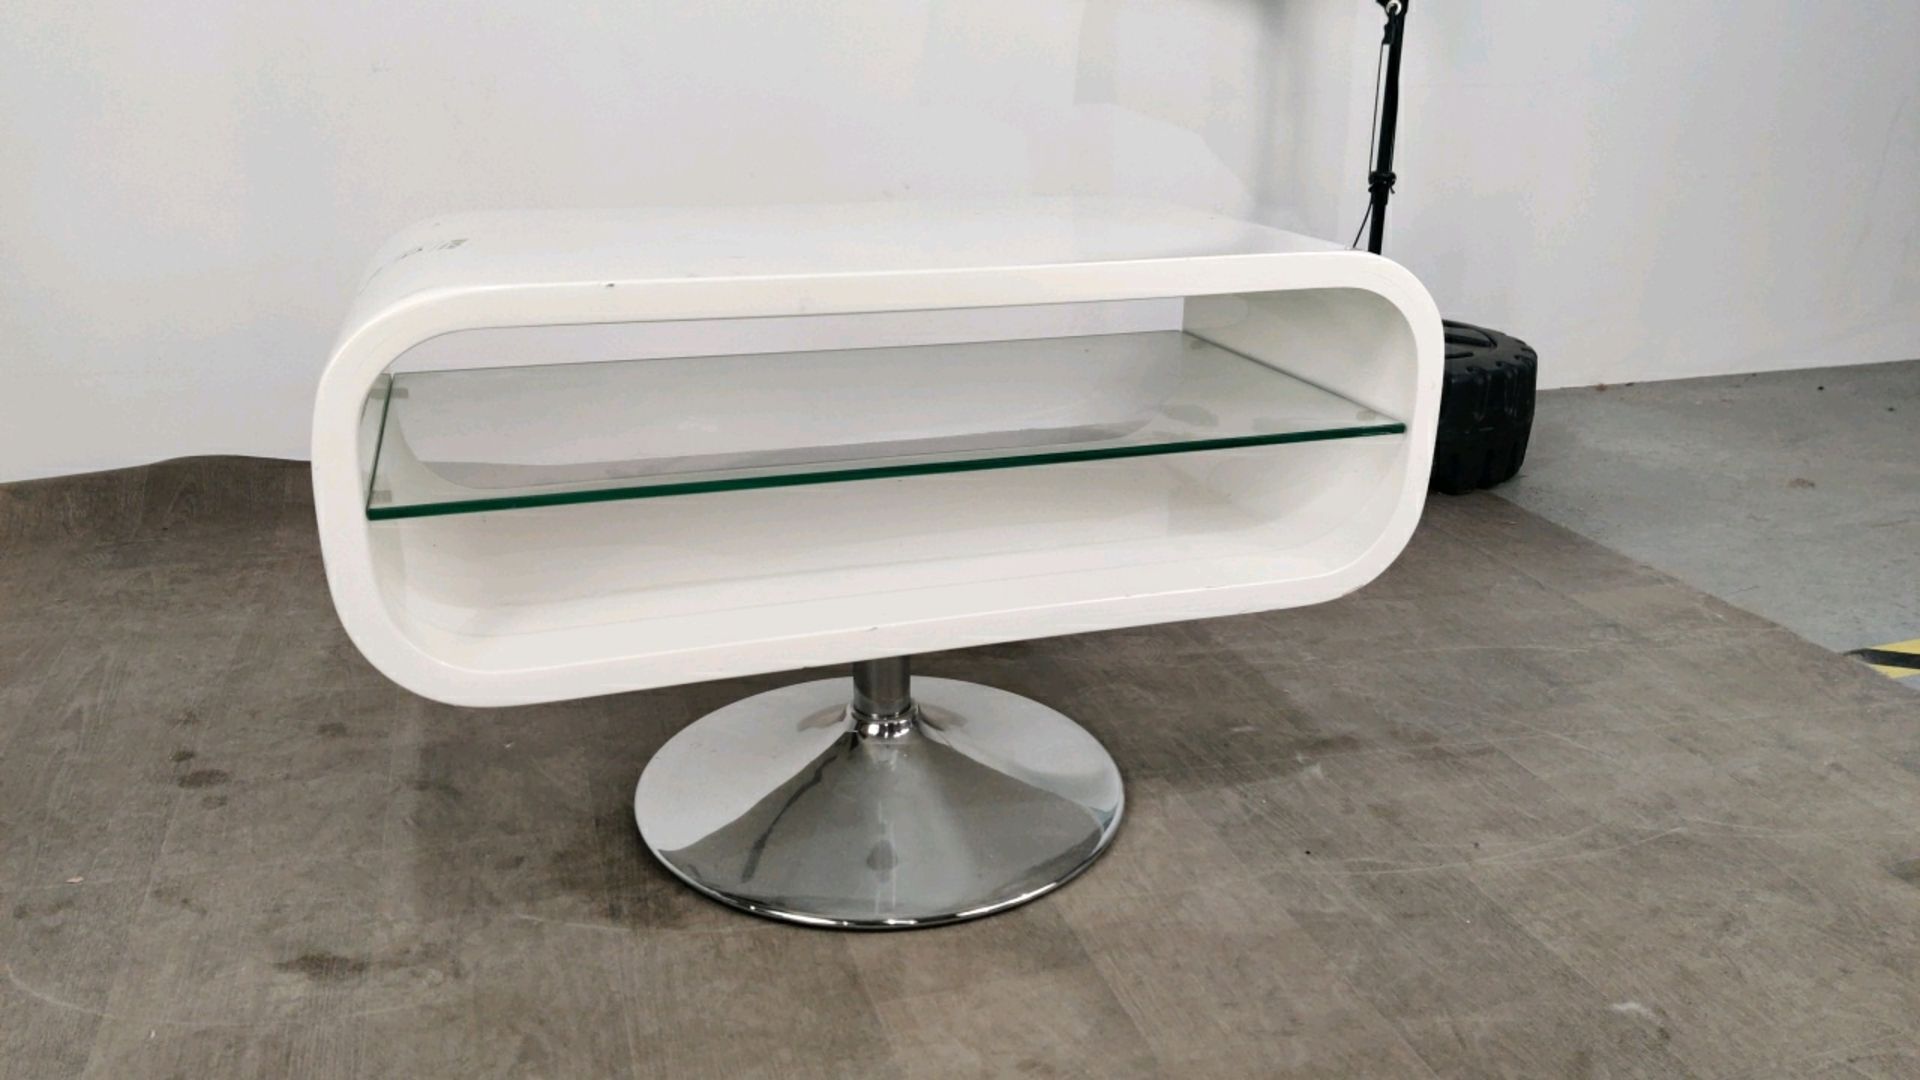 Techlink TV Stand - White Gloss - Image 2 of 5